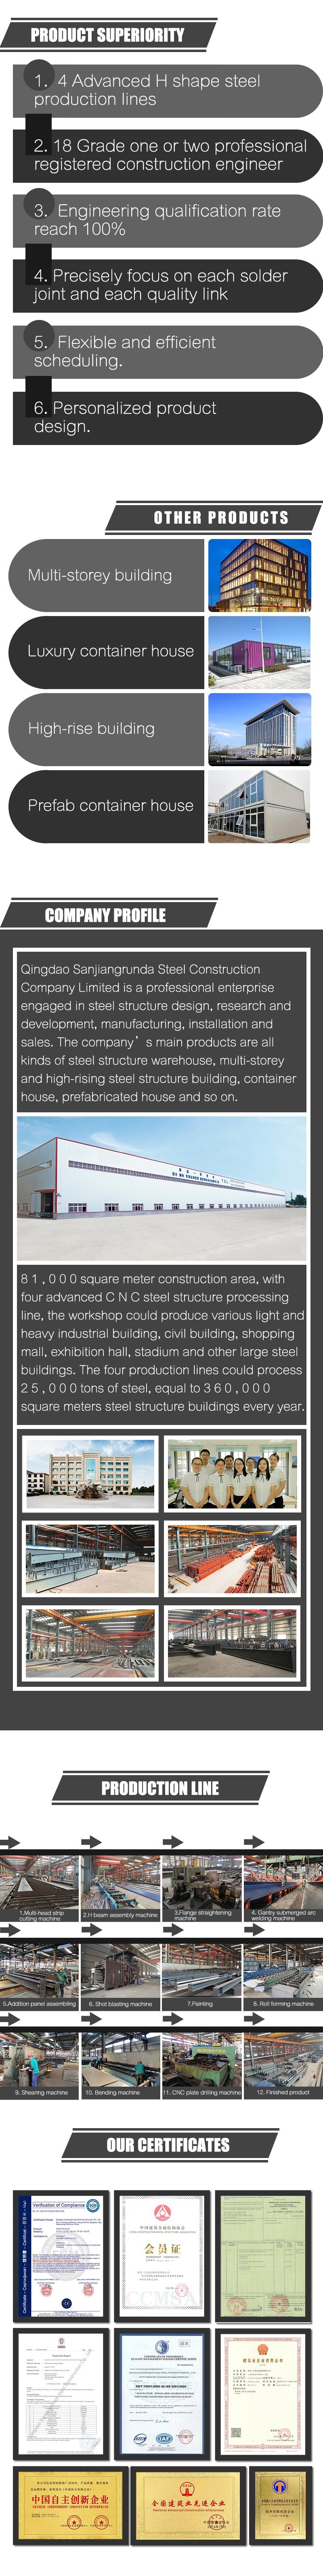 Steel Frame Warehouse Welded Ball Steel Space Steel Structure Frame Building